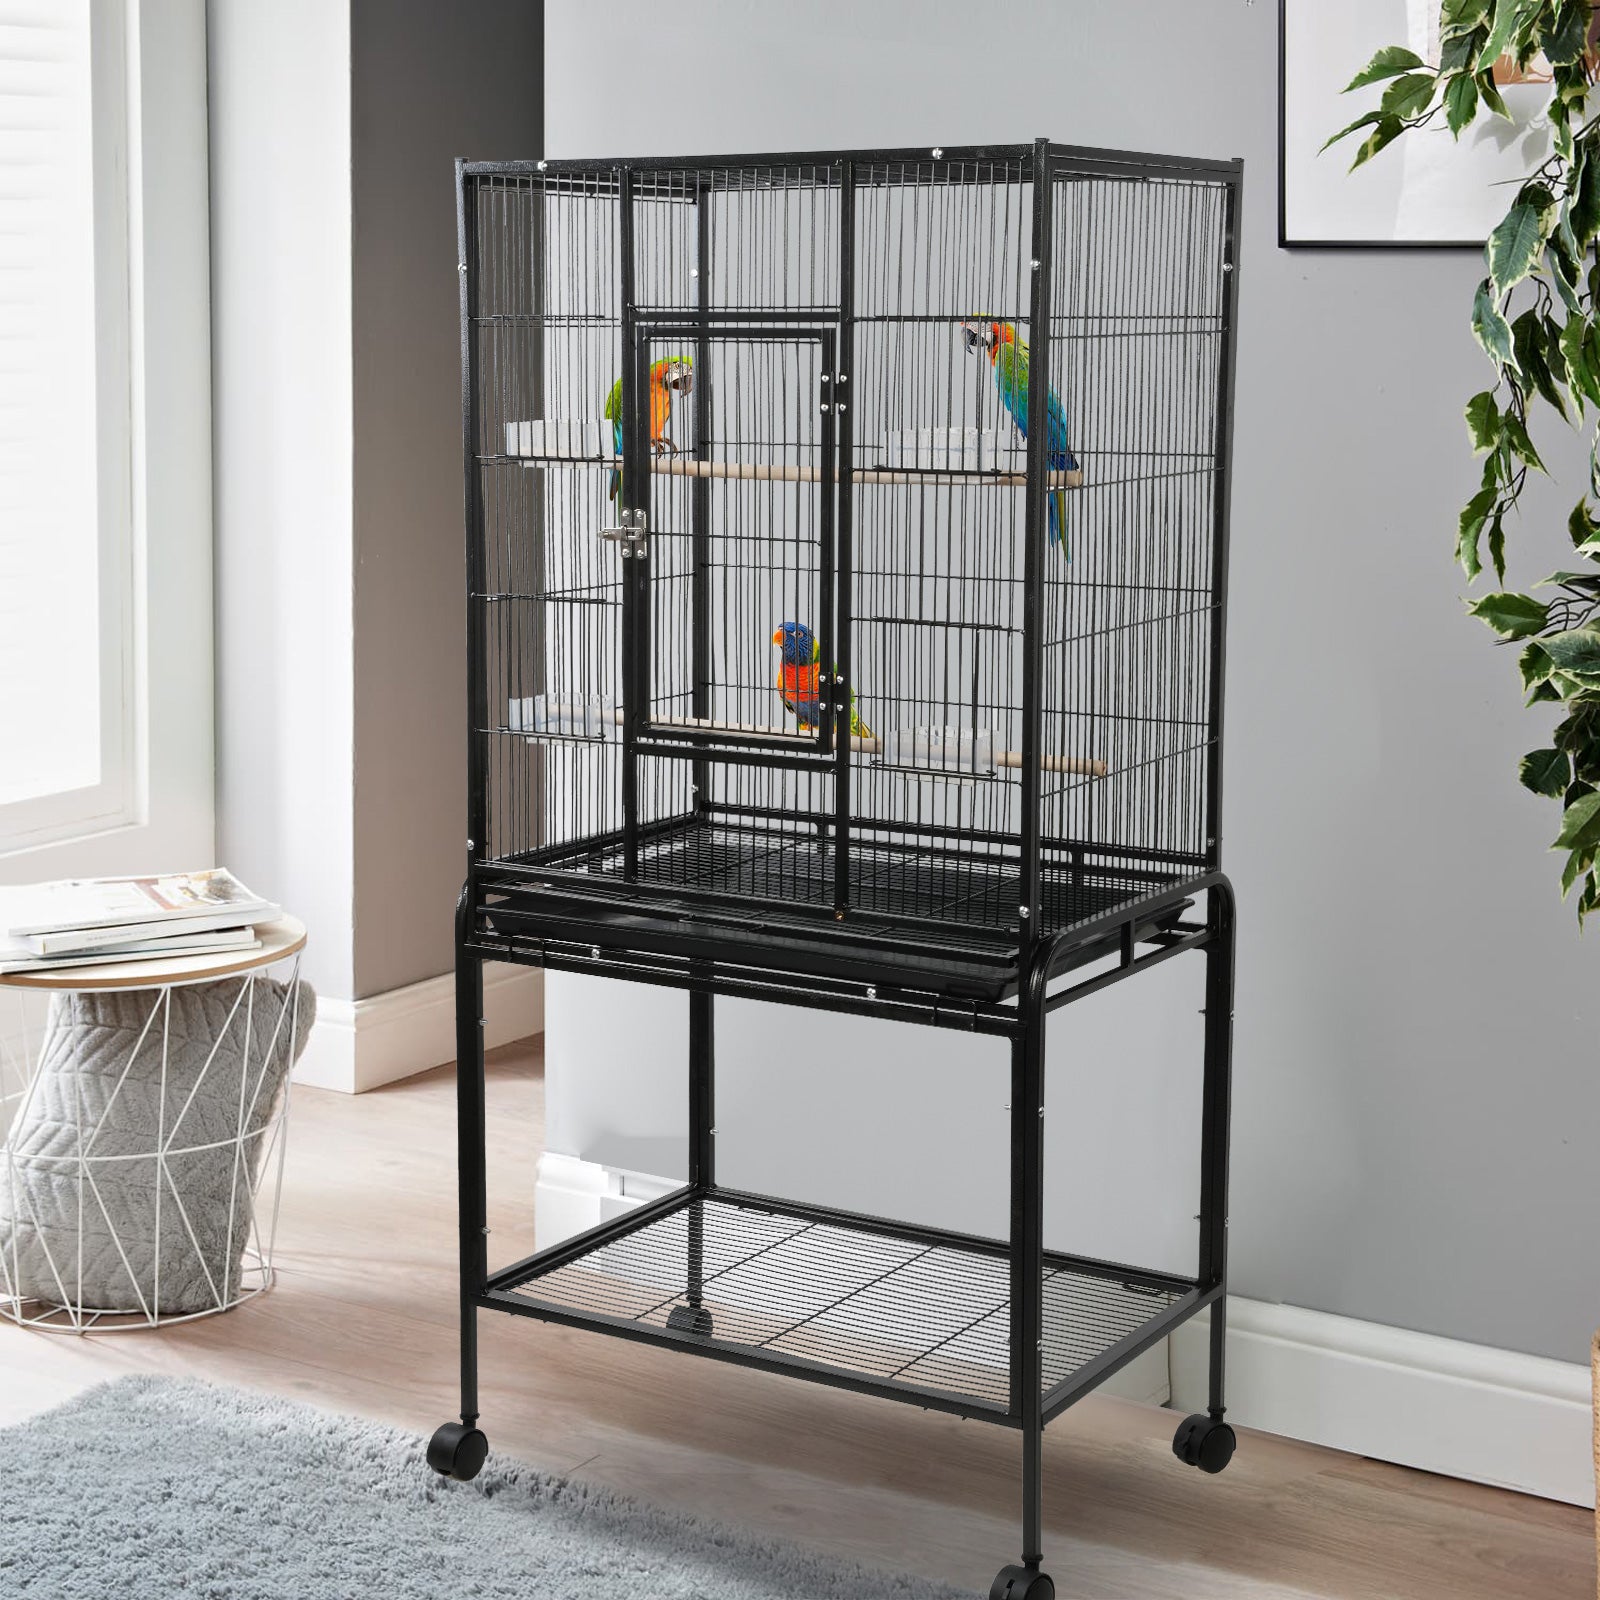 53" Big Rolling Bird Cage Parrot Flight Cage with Detachable Stand Storage Shelf and Wheels, Black